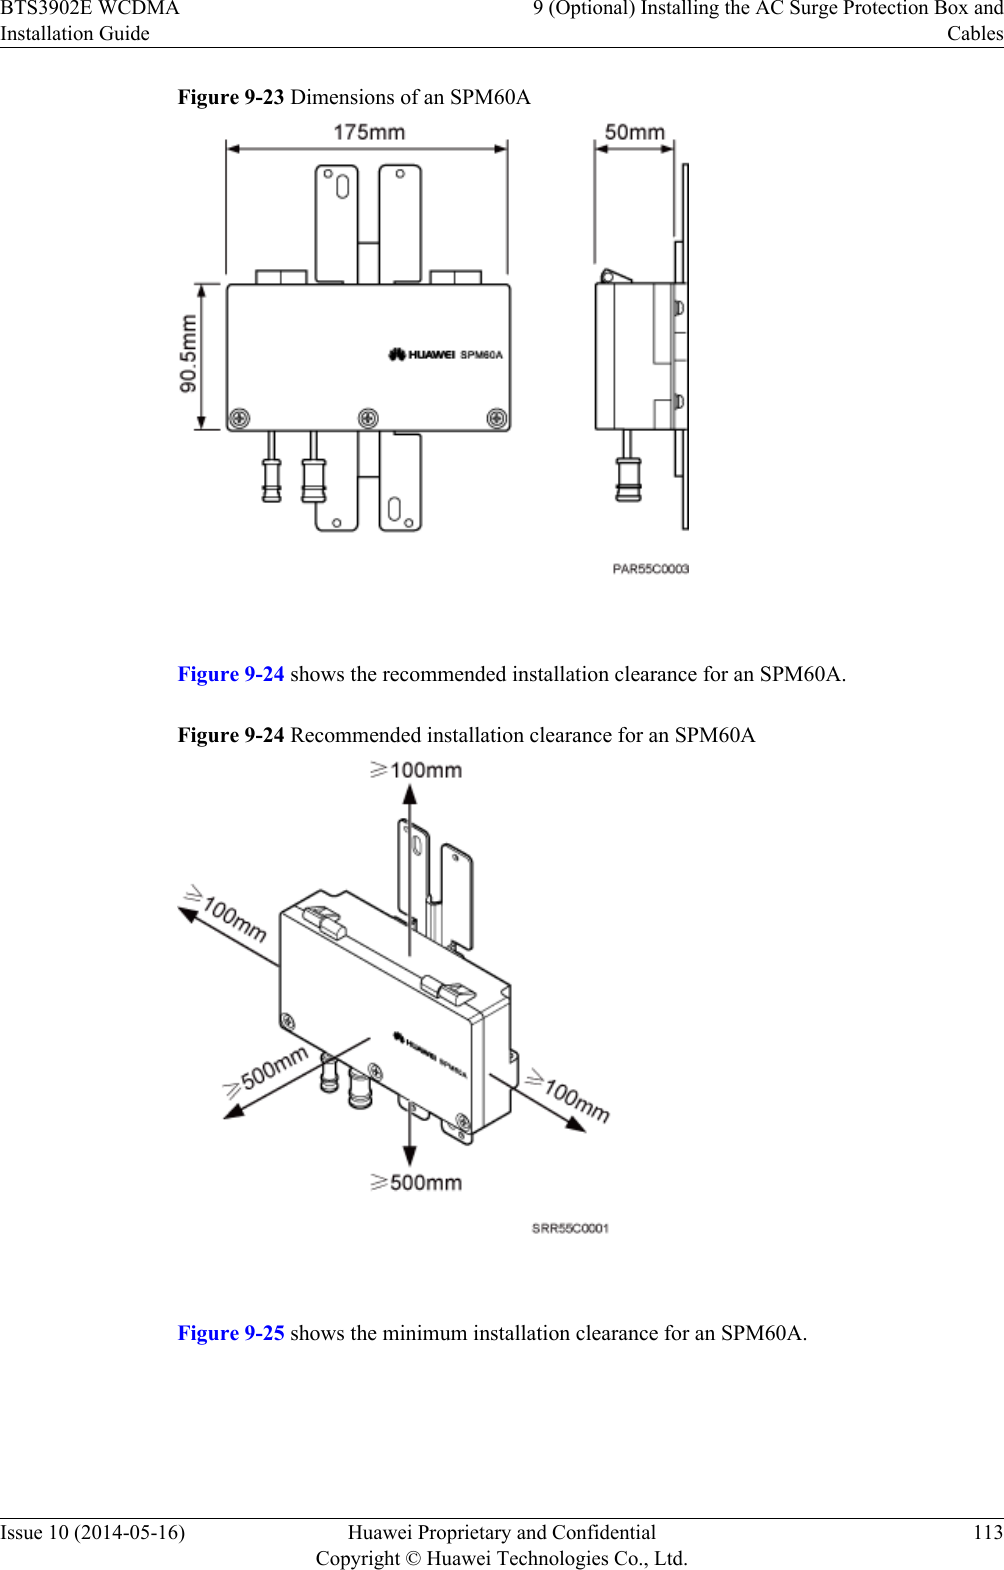 Figure 9-23 Dimensions of an SPM60A Figure 9-24 shows the recommended installation clearance for an SPM60A.Figure 9-24 Recommended installation clearance for an SPM60A Figure 9-25 shows the minimum installation clearance for an SPM60A.BTS3902E WCDMAInstallation Guide9 (Optional) Installing the AC Surge Protection Box andCablesIssue 10 (2014-05-16) Huawei Proprietary and ConfidentialCopyright © Huawei Technologies Co., Ltd.113